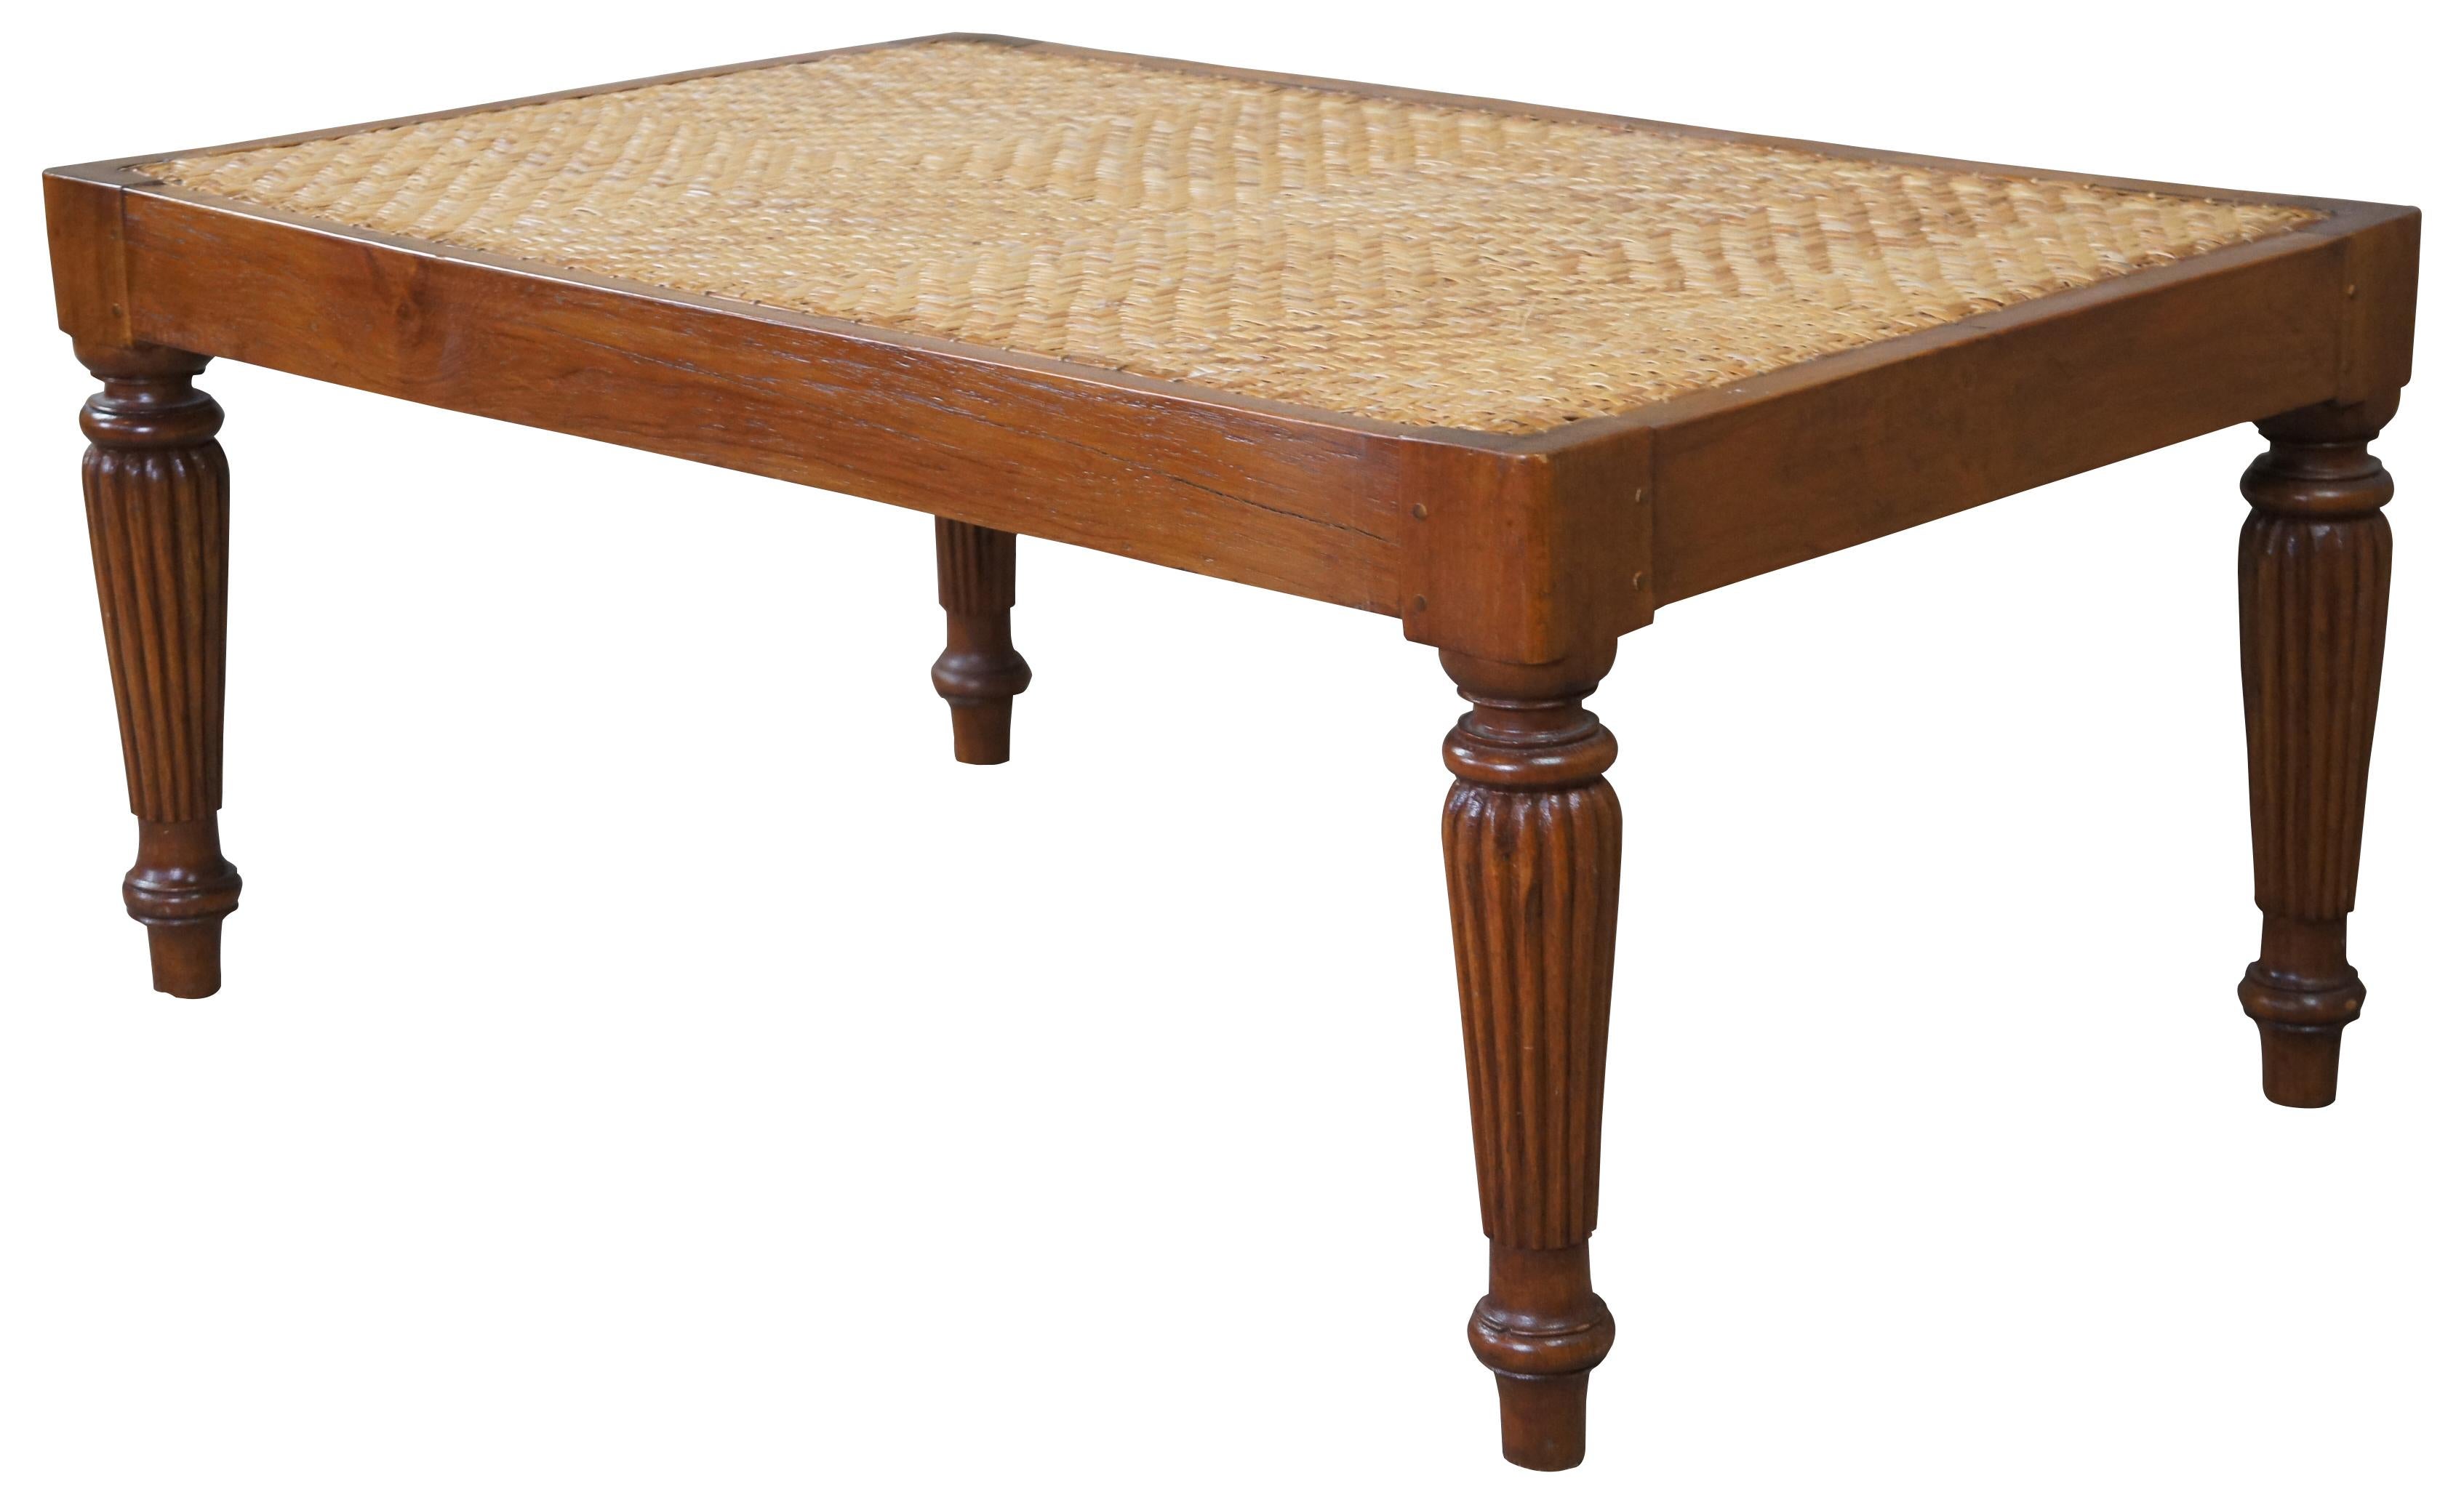 British colonial style coffee table. Made during second half of the 20th century. Features a teak frame with woven rattan top. The table is supported by reeded legs leading to an arrow foot. Can be used as a bench.
   